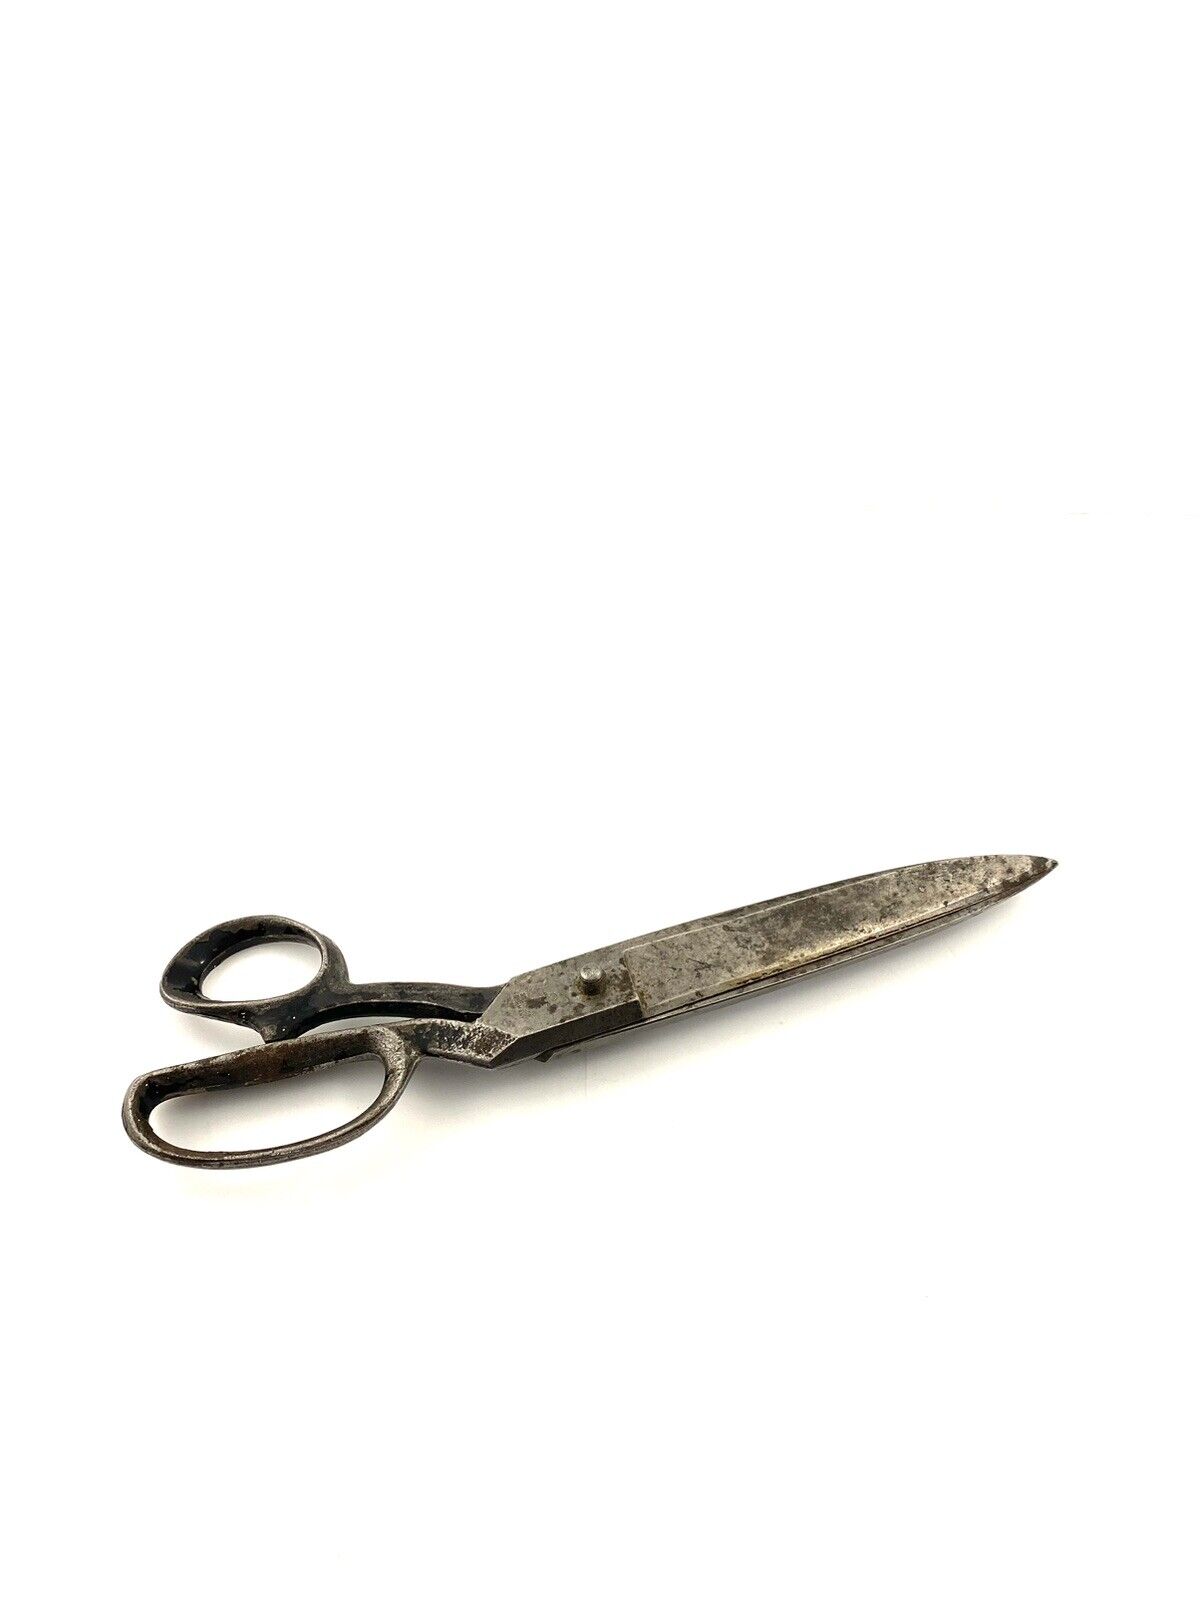 Antique Sewing tailor Scissors shears TAYLOR SOLINGEN Germany 1920\'s